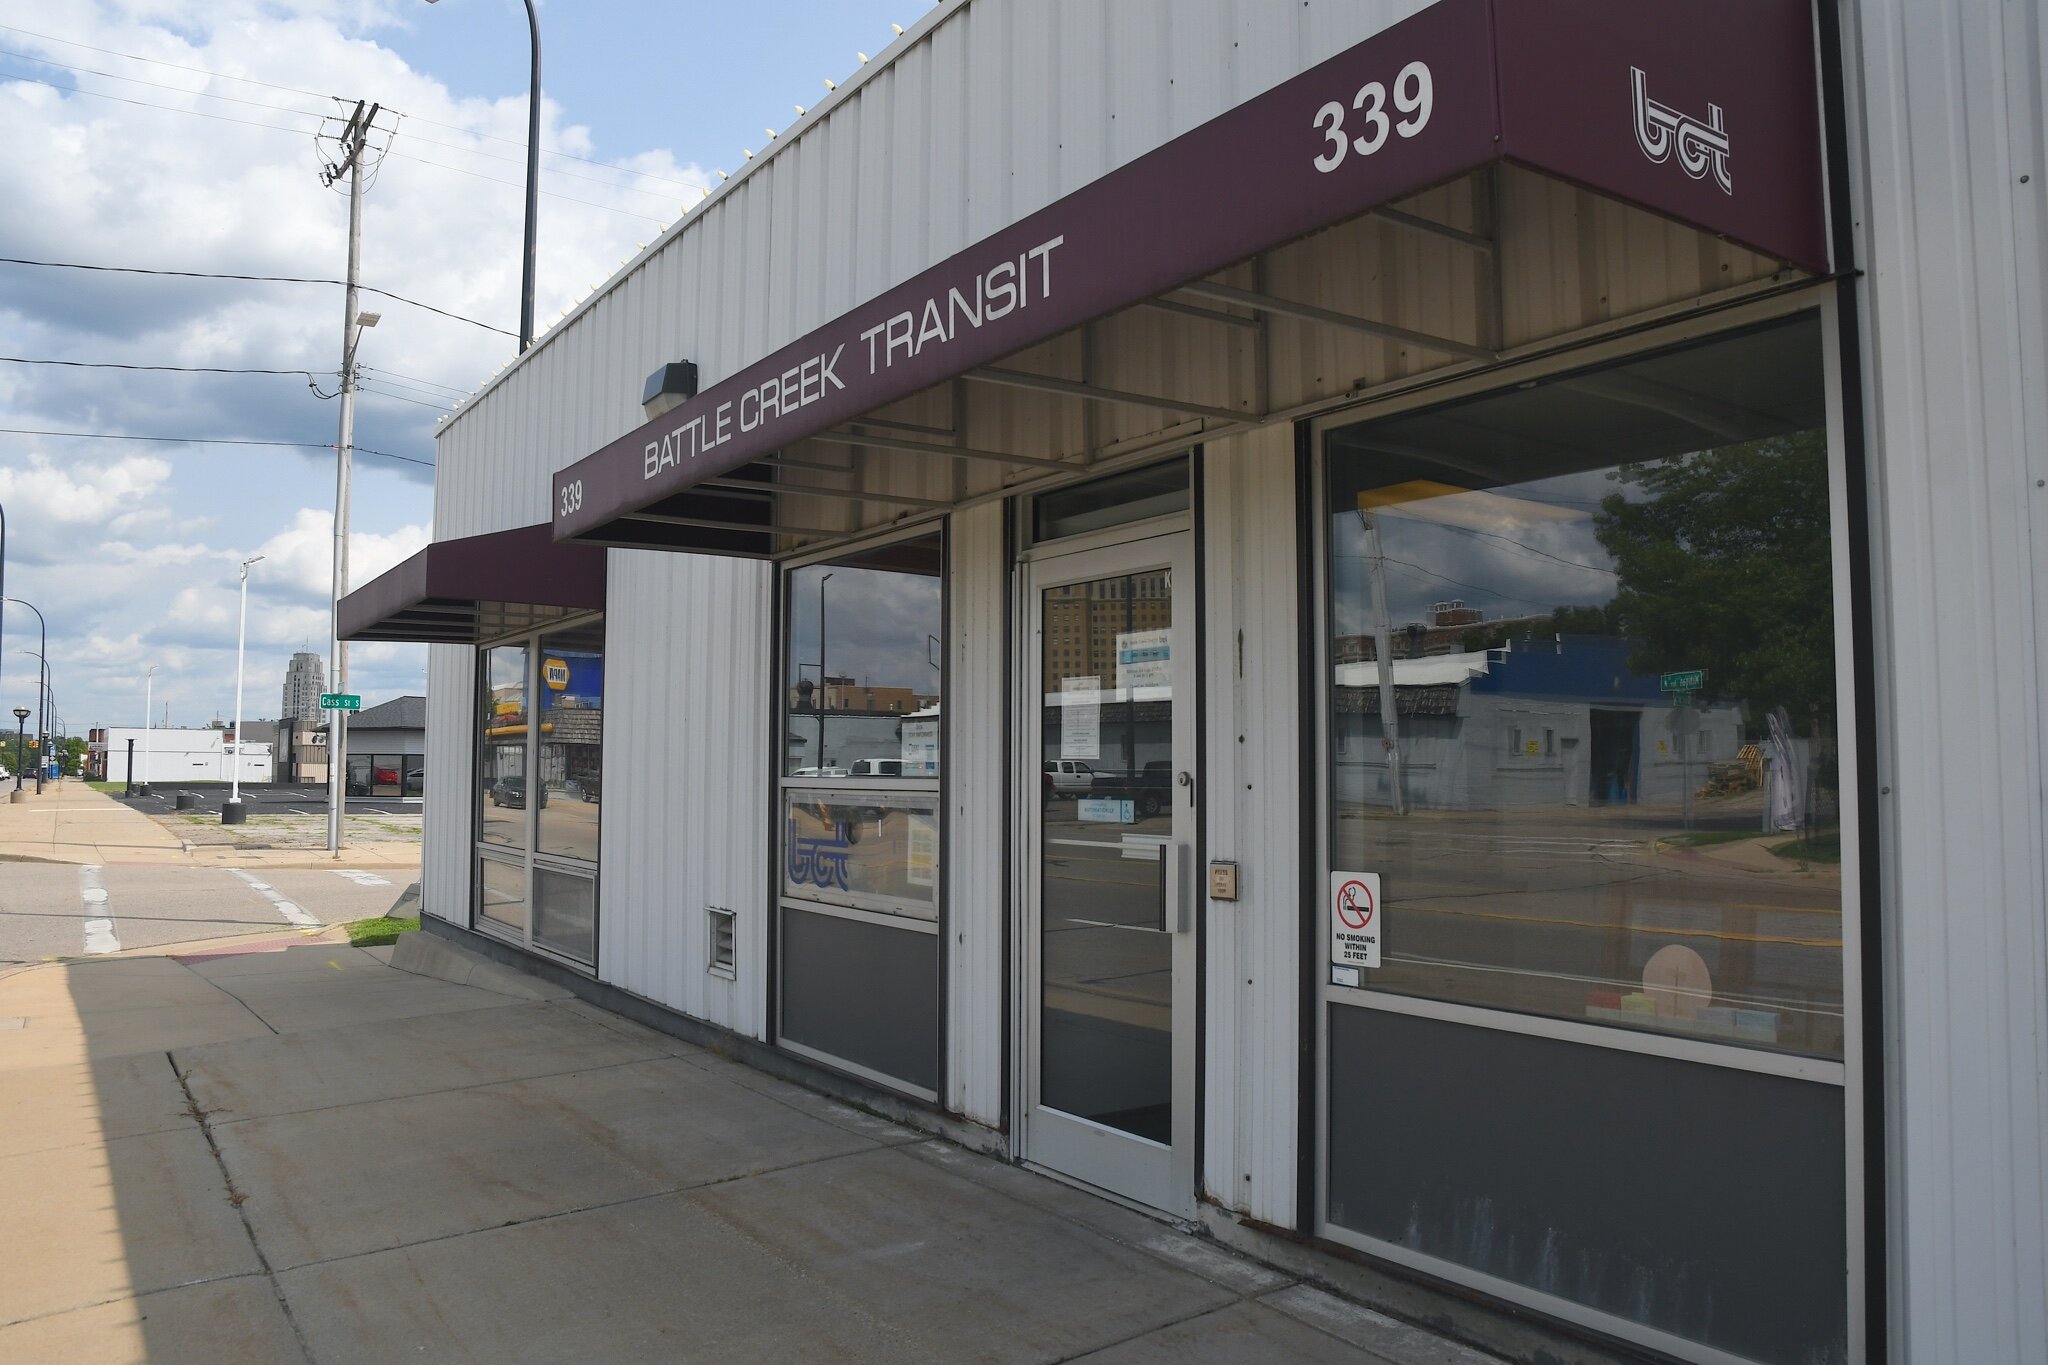 BC Transit is located on West Michigan Avenue near downtown Battle Creek.